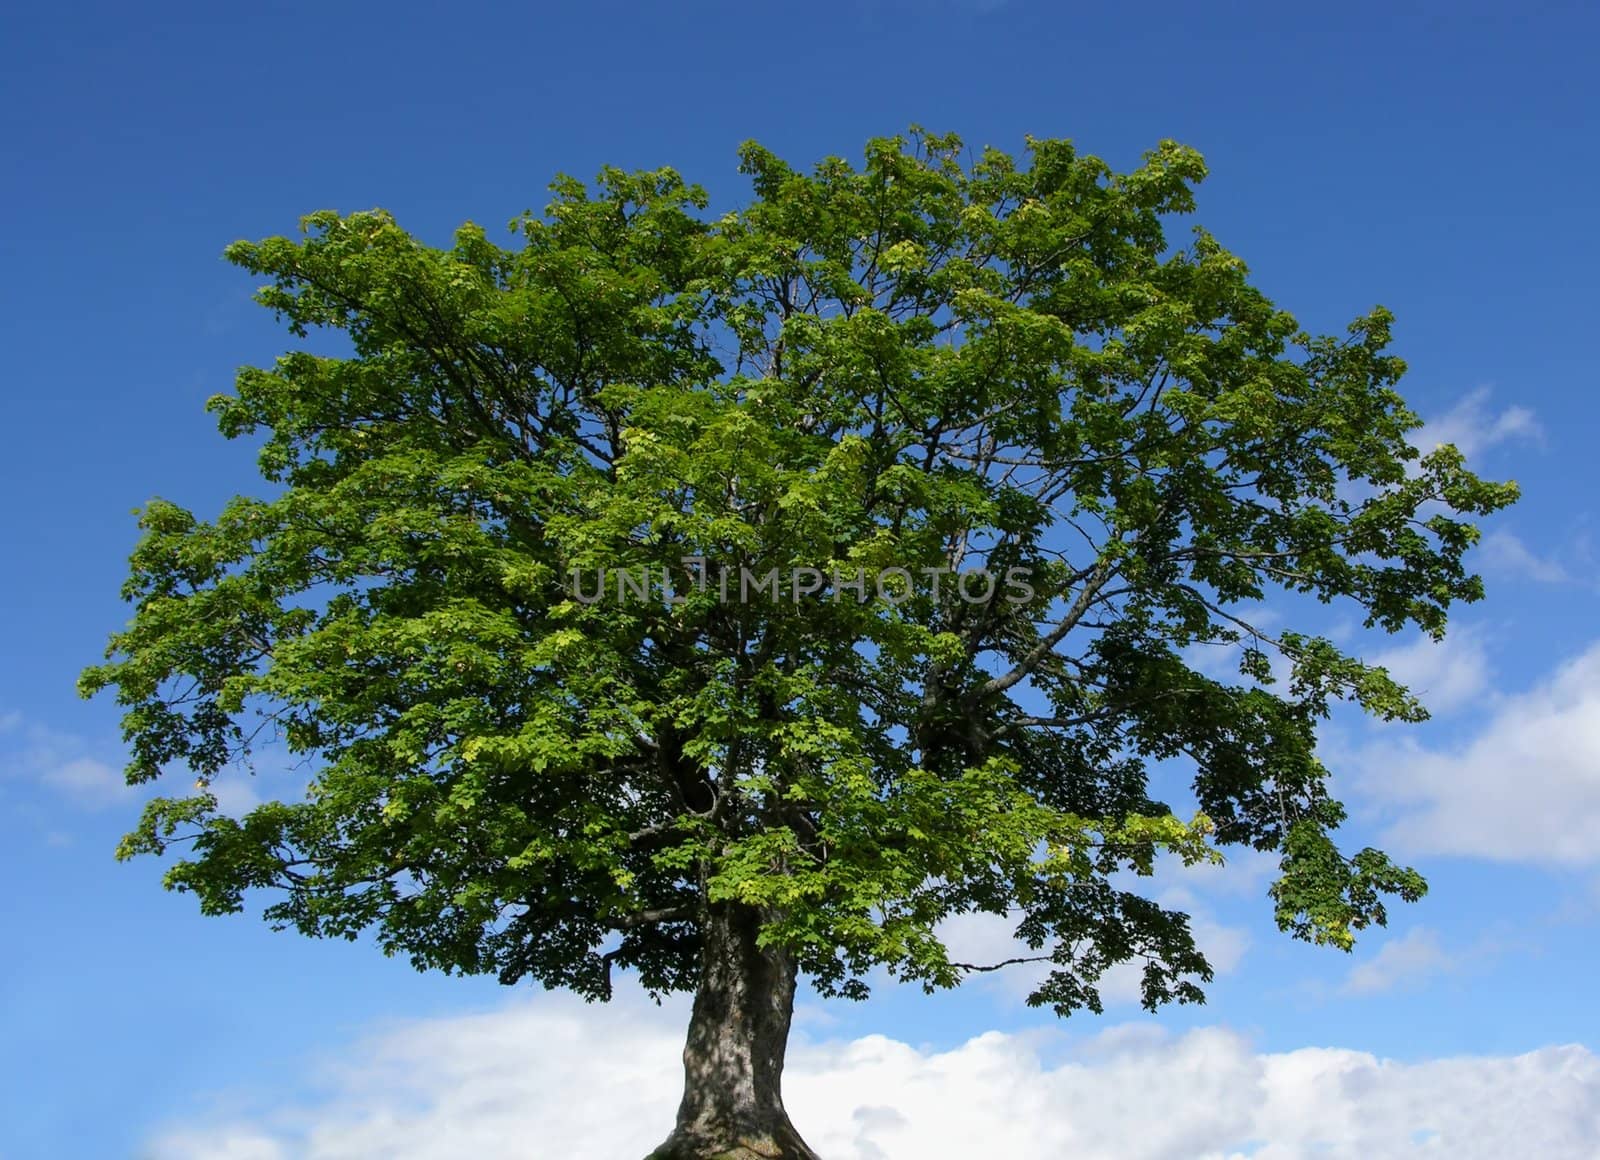 Mountain maple tree and blue sky